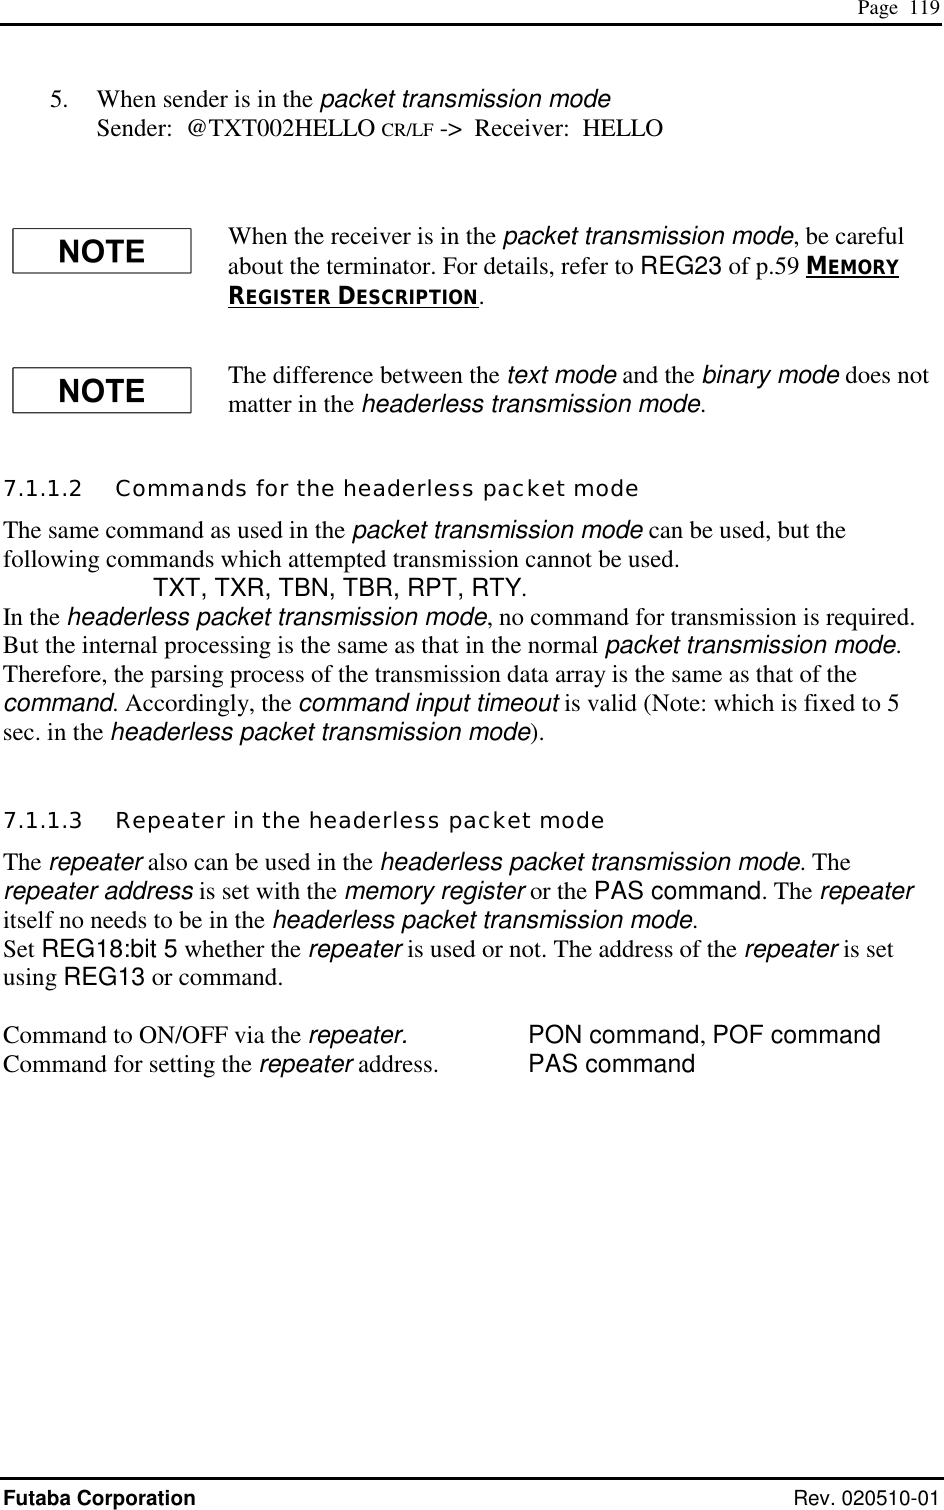  Page  119 Futaba Corporation Rev. 020510-01 5.   When sender is in the packet transmission mode  Sender:  @TXT002HELLO CR/LF -&gt;  Receiver:  HELLO  When the receiver is in the packet transmission mode, be careful about the terminator. For details, refer to REG23 of p.59 MEMORY REGISTER DESCRIPTION. The difference between the text mode and the binary mode does not matter in the headerless transmission mode. 7.1.1.2   Commands for the headerless packet mode The same command as used in the packet transmission mode can be used, but the following commands which attempted transmission cannot be used.       TXT, TXR, TBN, TBR, RPT, RTY. In the headerless packet transmission mode, no command for transmission is required. But the internal processing is the same as that in the normal packet transmission mode. Therefore, the parsing process of the transmission data array is the same as that of the command. Accordingly, the command input timeout is valid (Note: which is fixed to 5 sec. in the headerless packet transmission mode).  7.1.1.3   Repeater in the headerless packet mode The repeater also can be used in the headerless packet transmission mode. The repeater address is set with the memory register or the PAS command. The repeater itself no needs to be in the headerless packet transmission mode. Set REG18:bit 5 whether the repeater is used or not. The address of the repeater is set using REG13 or command.  Command to ON/OFF via the repeater.     PON command, POF command Command for setting the repeater address.    PAS command  